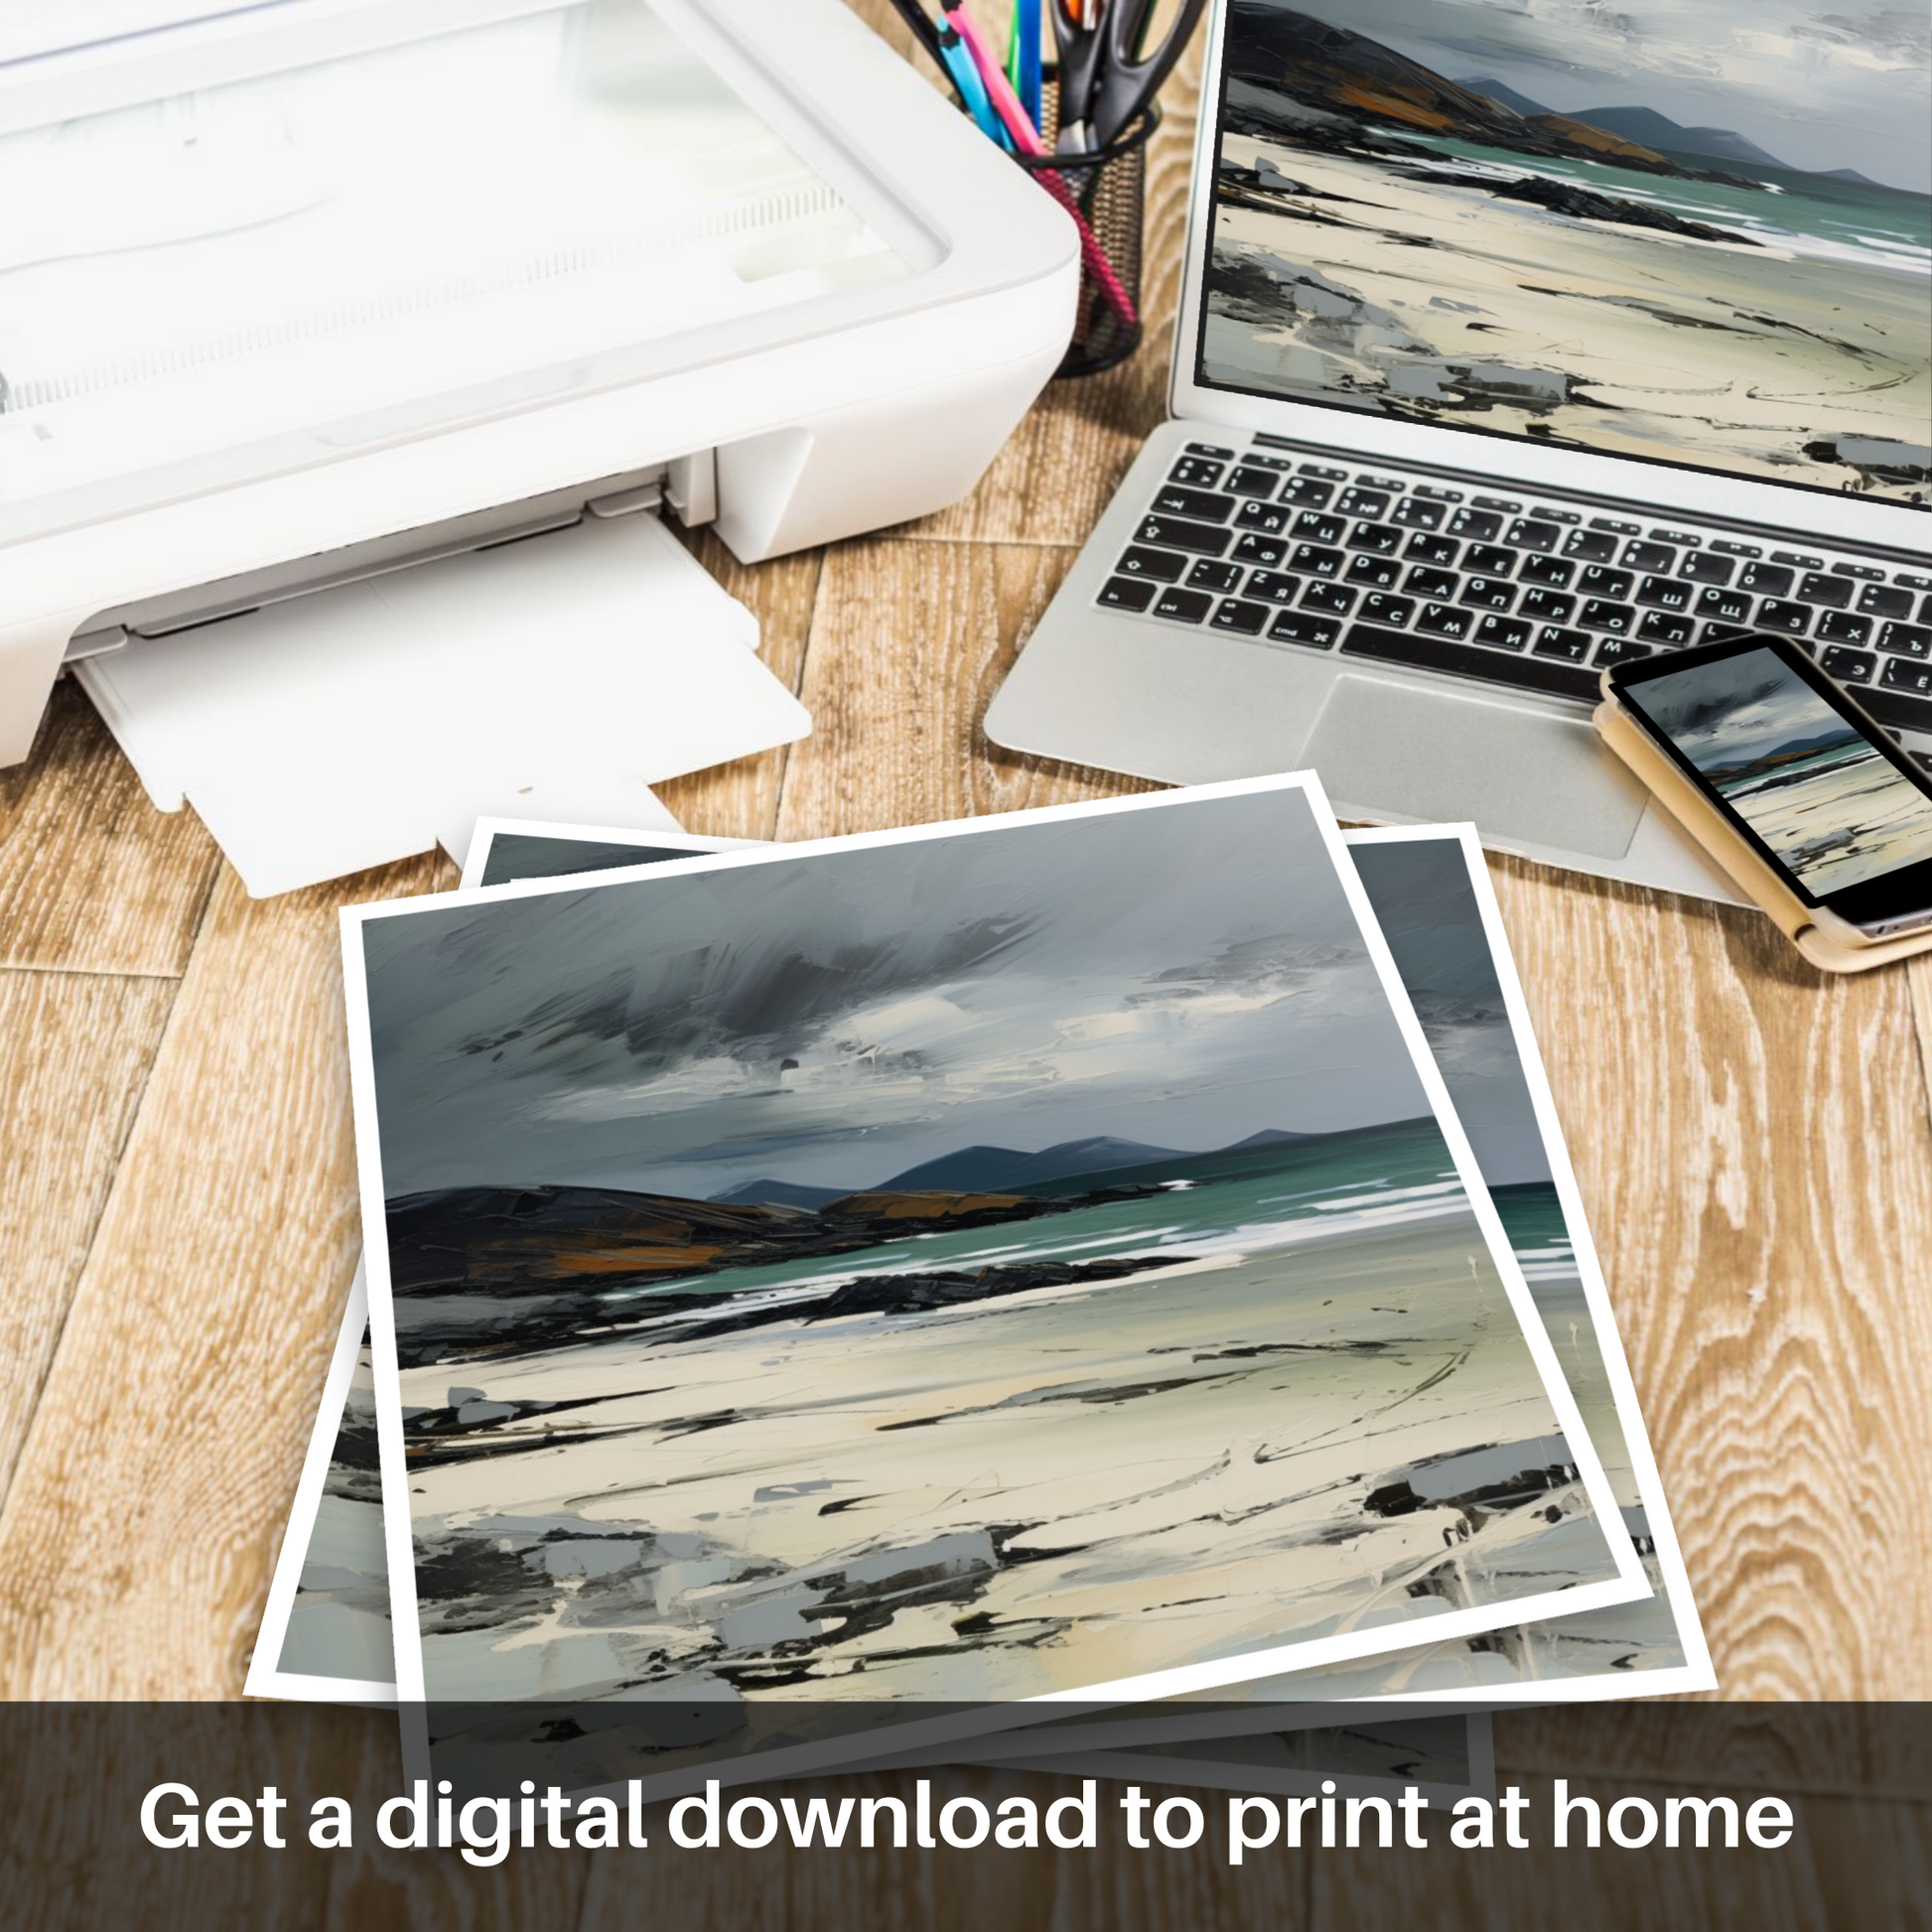 Downloadable and printable picture of Traigh Mhor, Isle of Barra